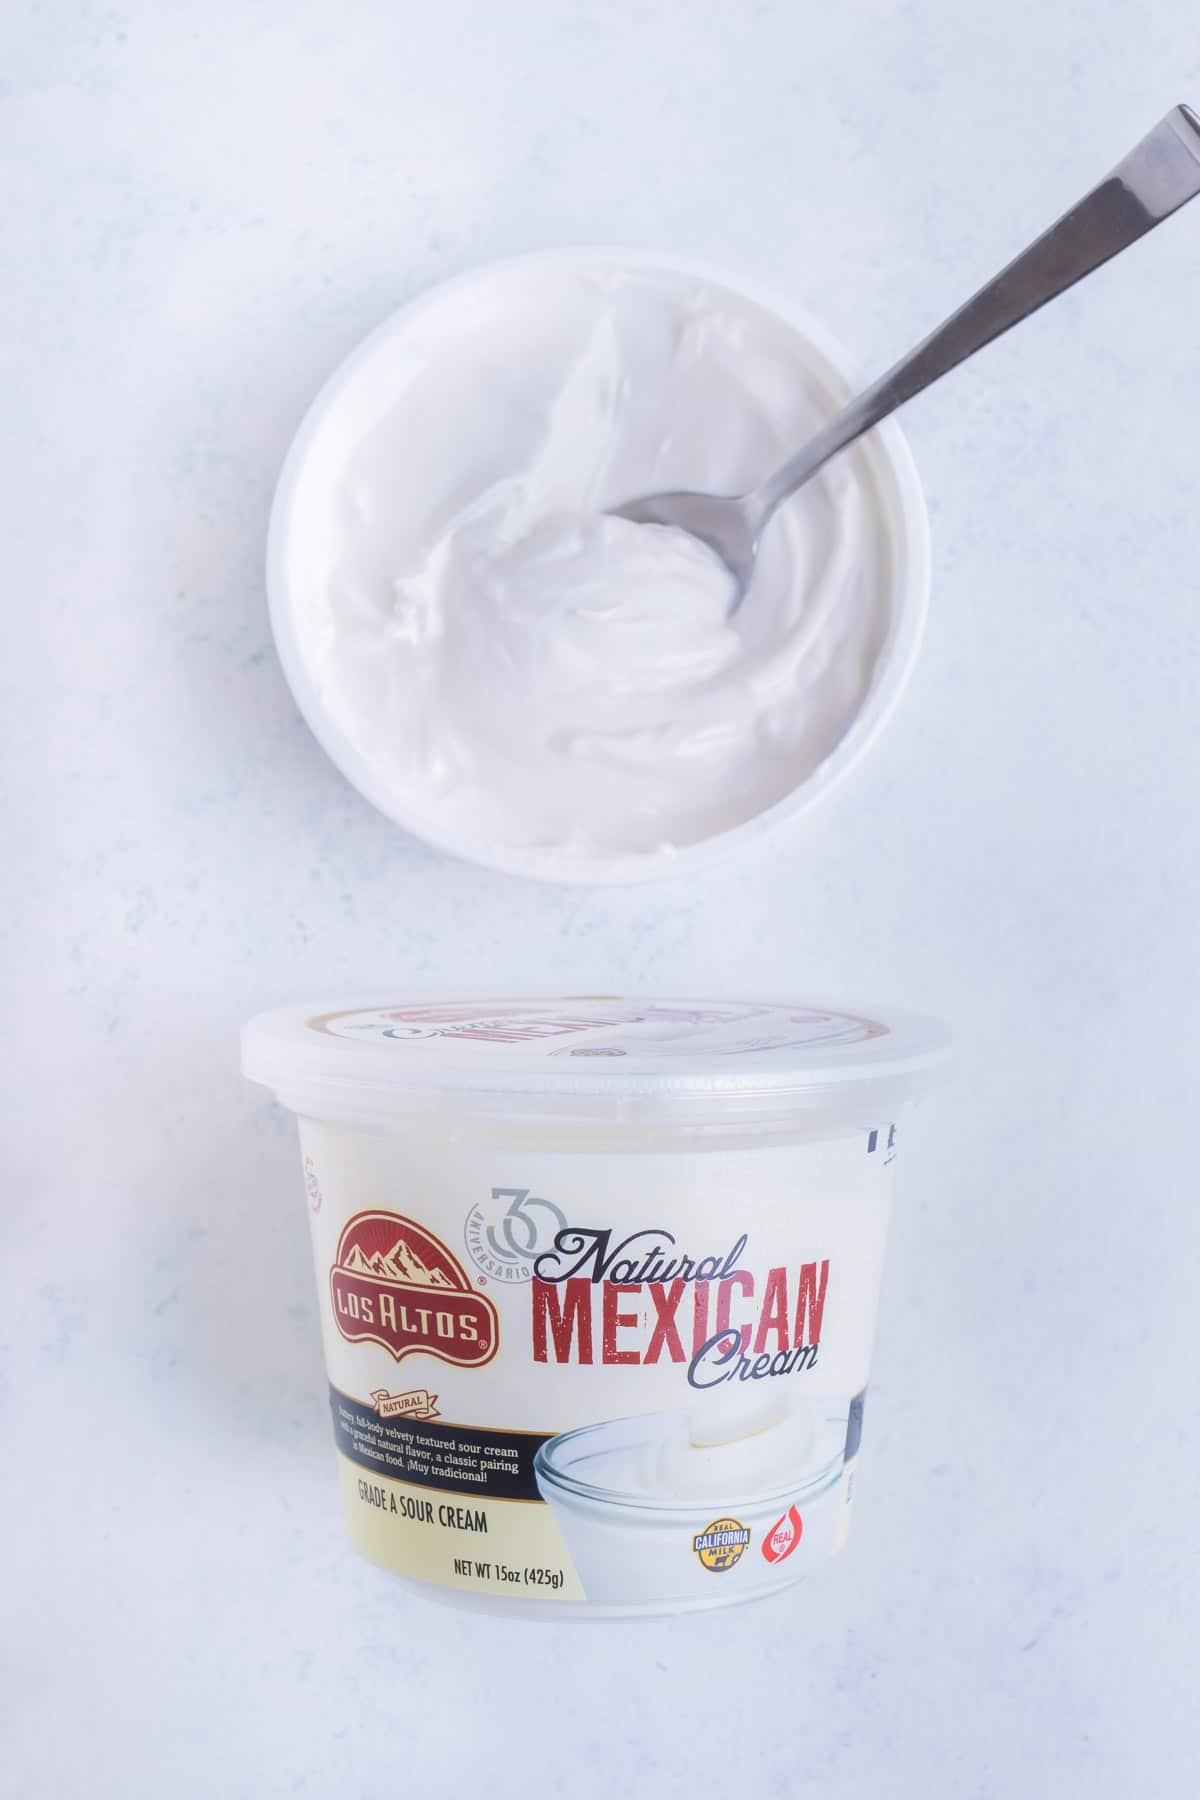 Mexican crema is used in this recipe.